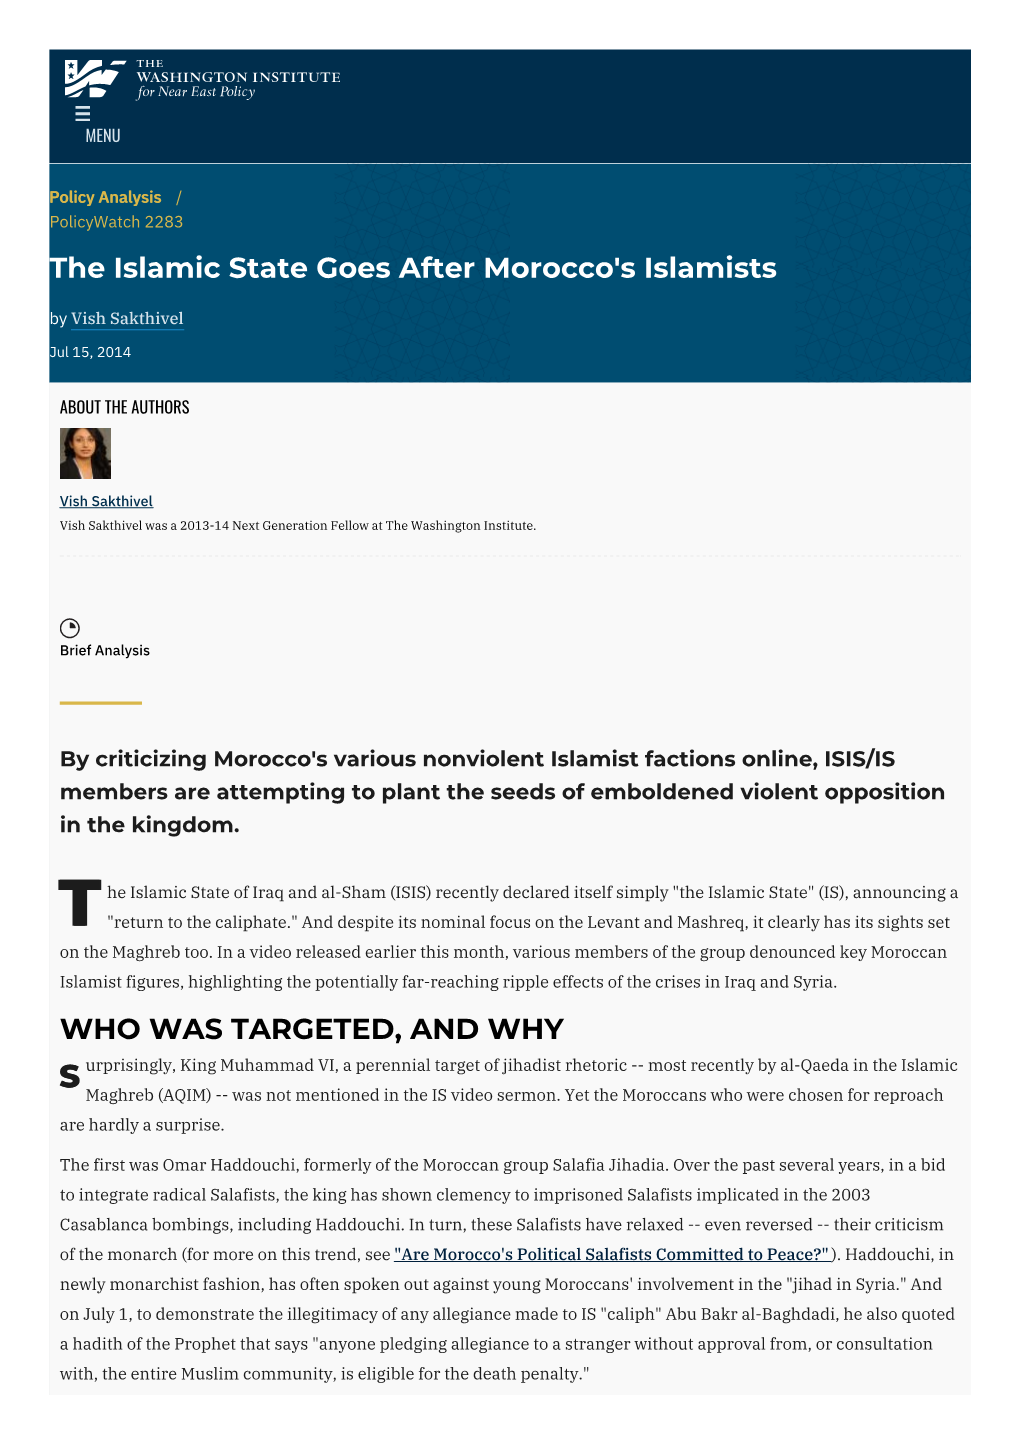 The Islamic State Goes After Morocco's Islamists | The